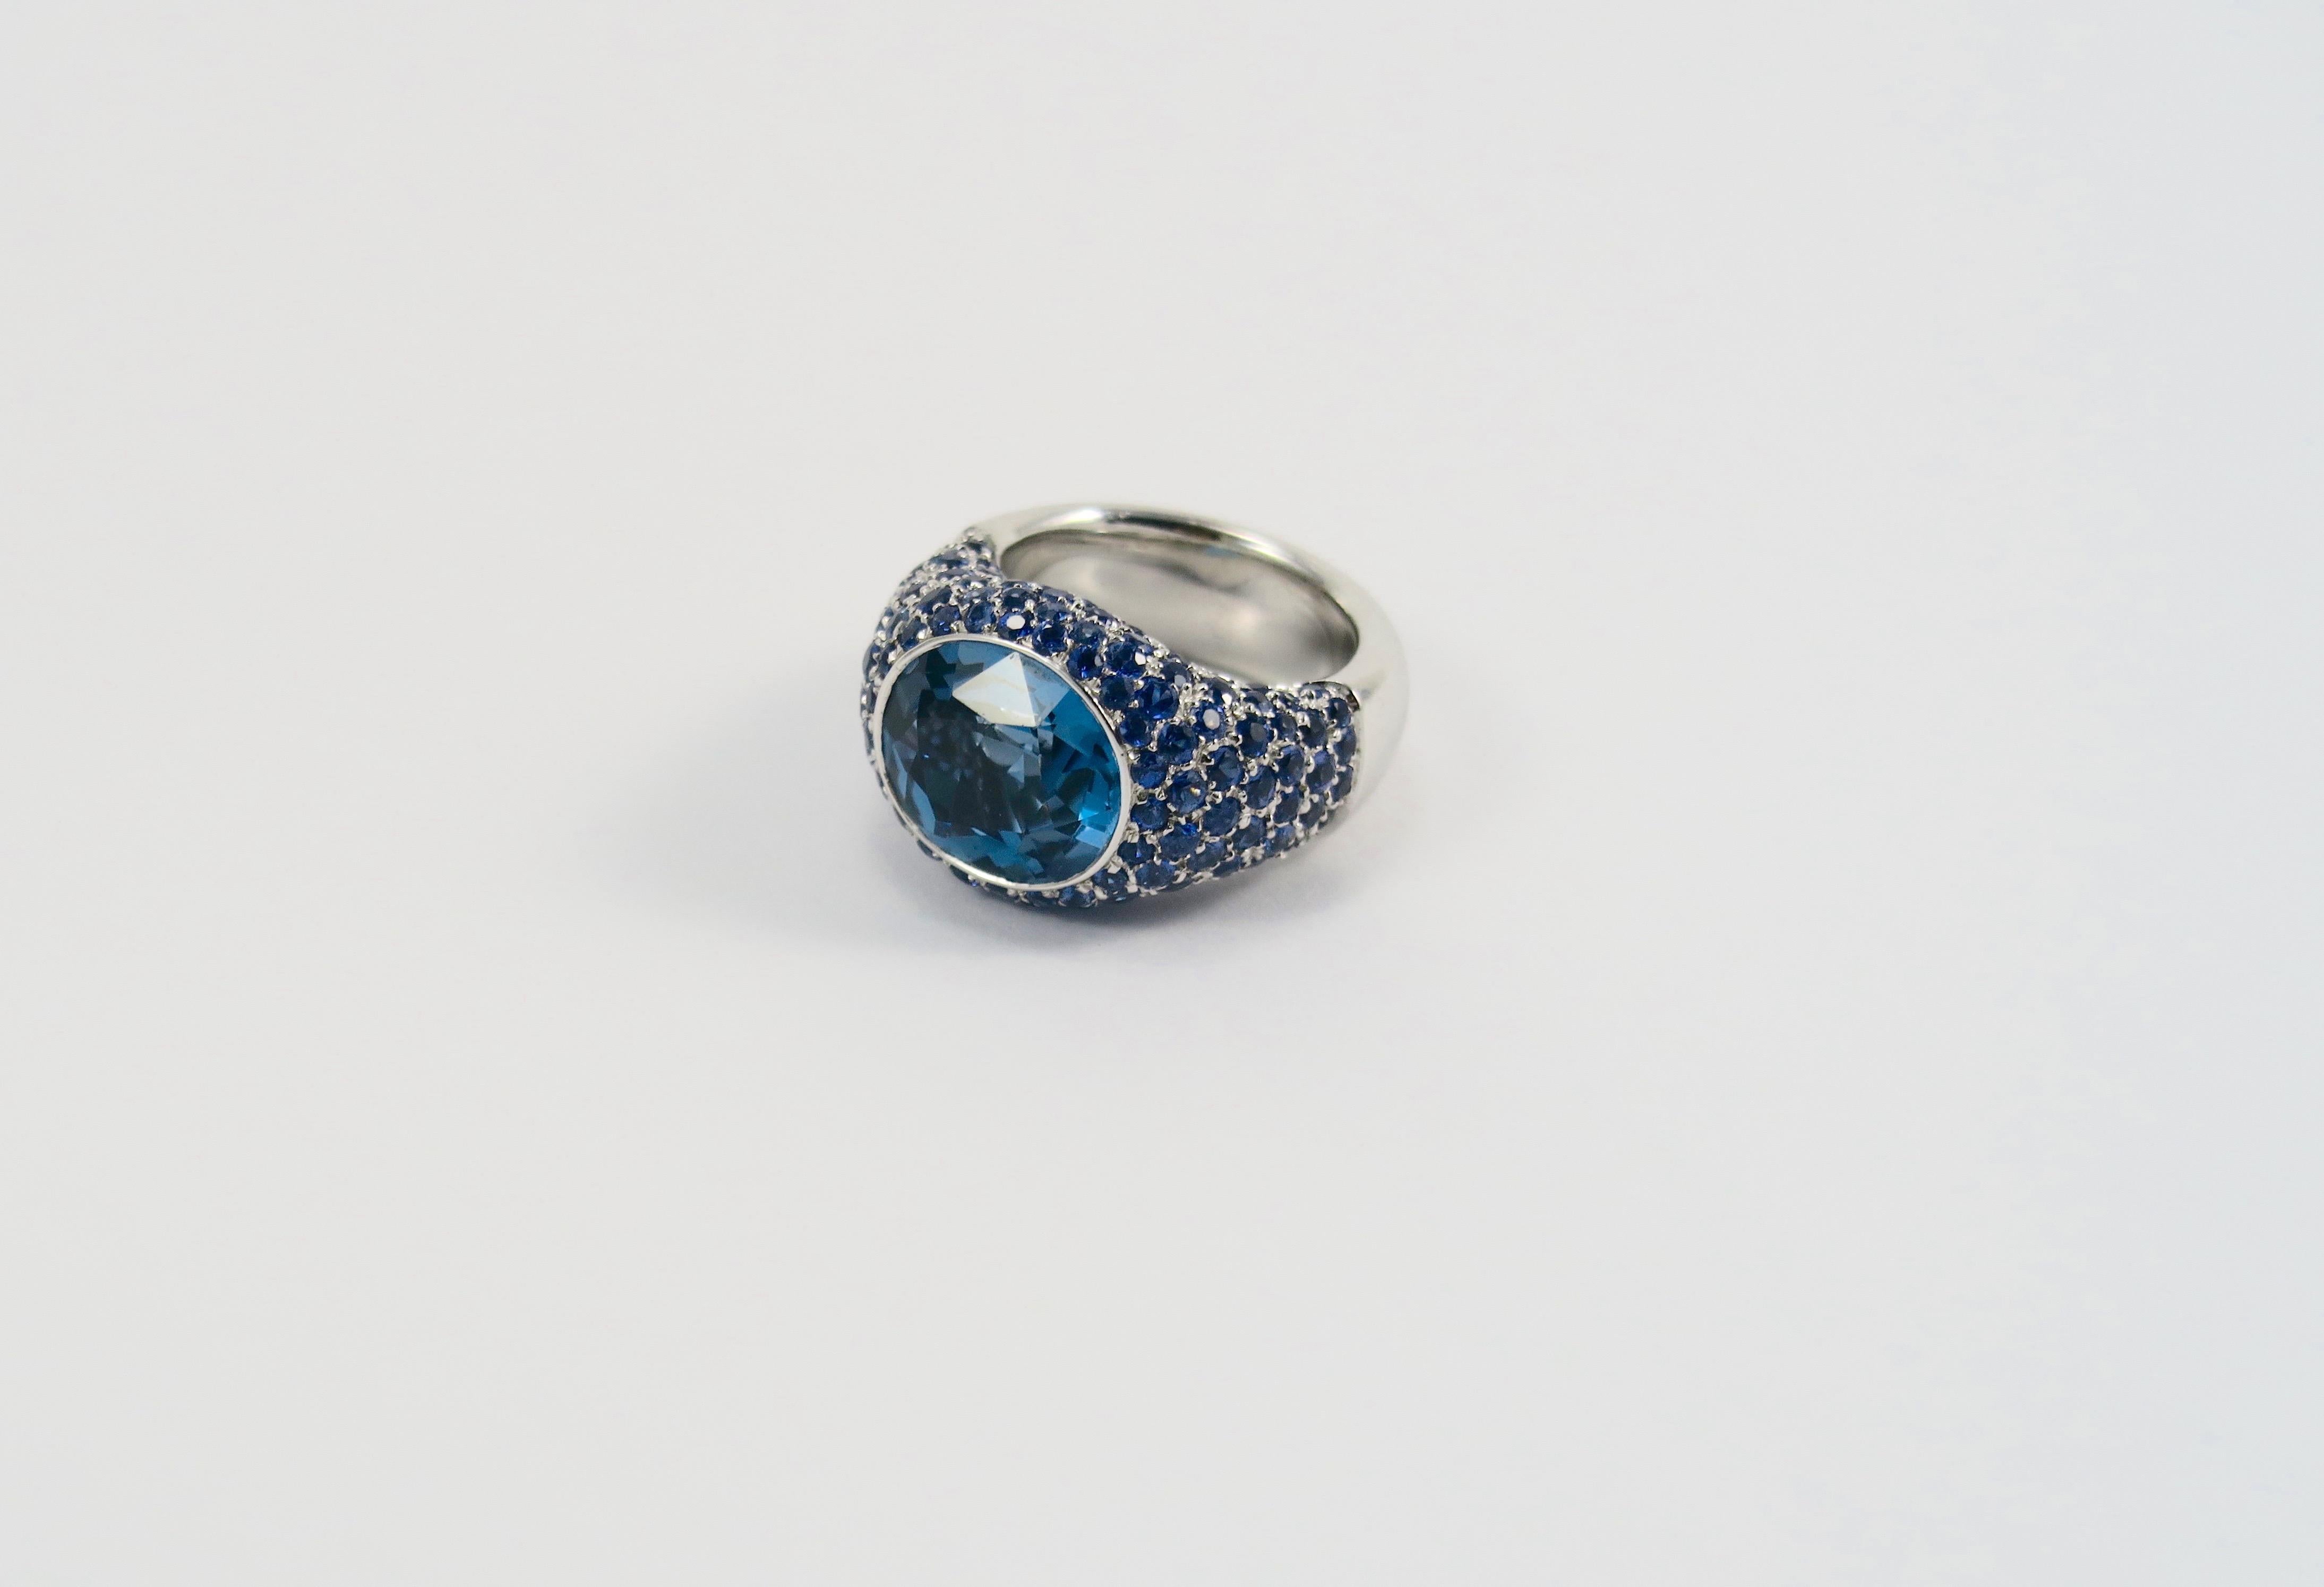 An elegant combination of blue topaz and blue sapphire in 18K white gold to give you a truly unique and stylish ring for any occasion. Extreme attention to the detail in the crafting process and high quality of the materials used make Pasquale